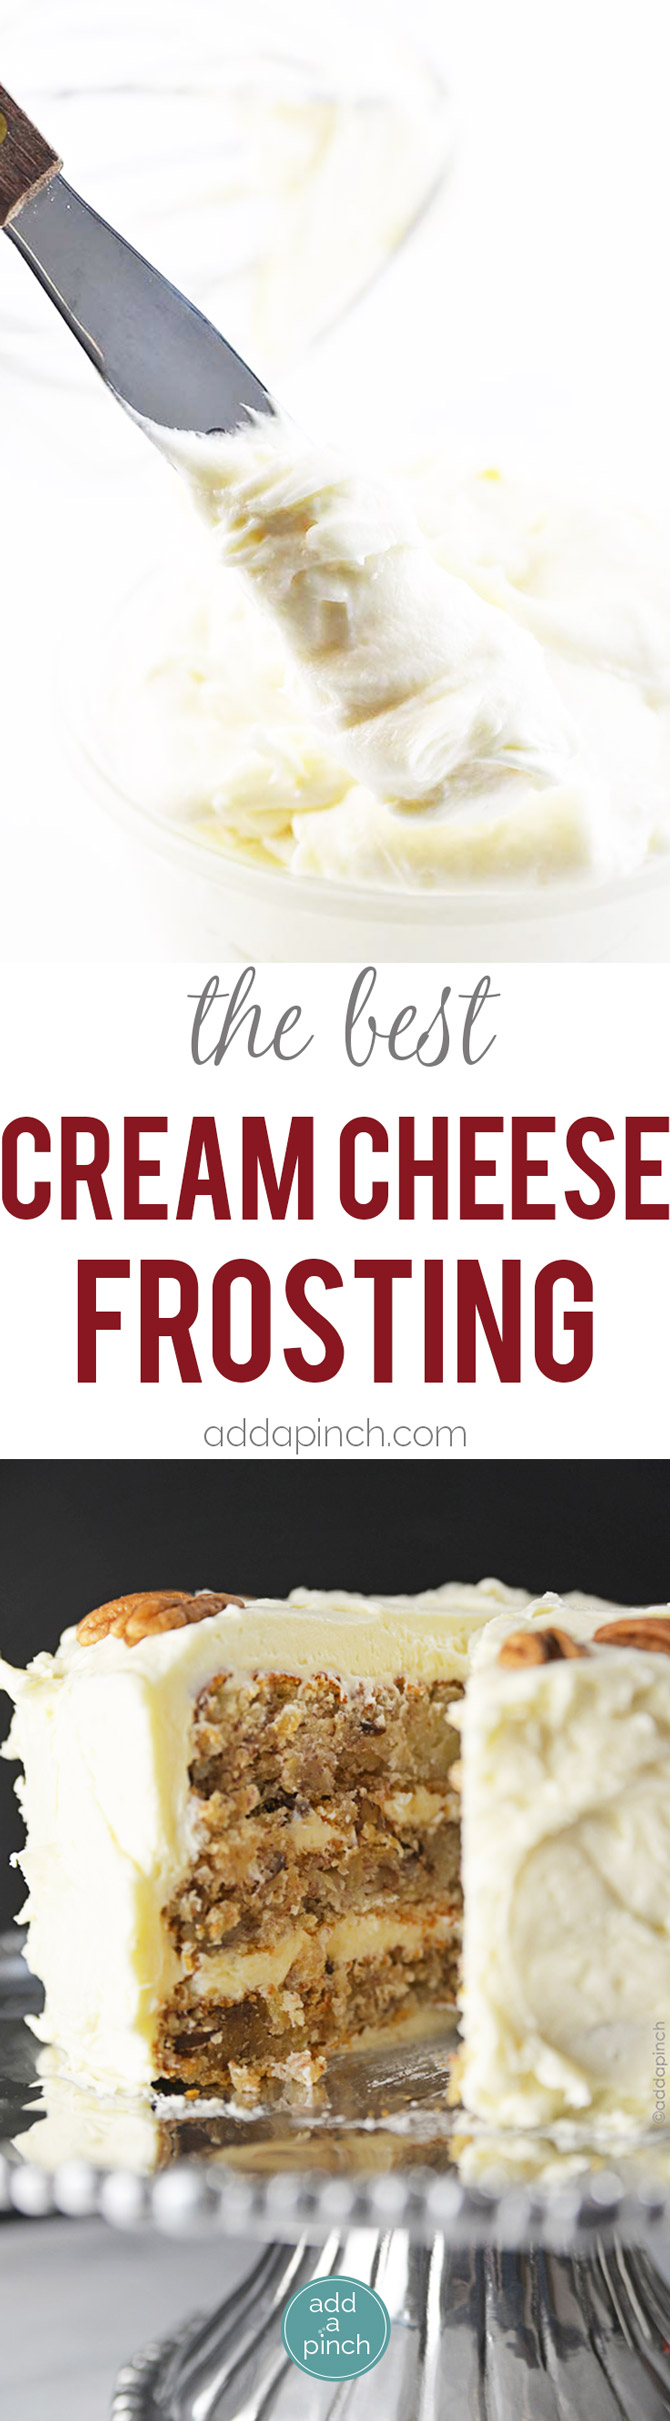 Cream Cheese Frosting makes the perfect frosting recipe for so many sweet treats. An easy, yet elegant cream cheese frosting recipe. // addapinch.com